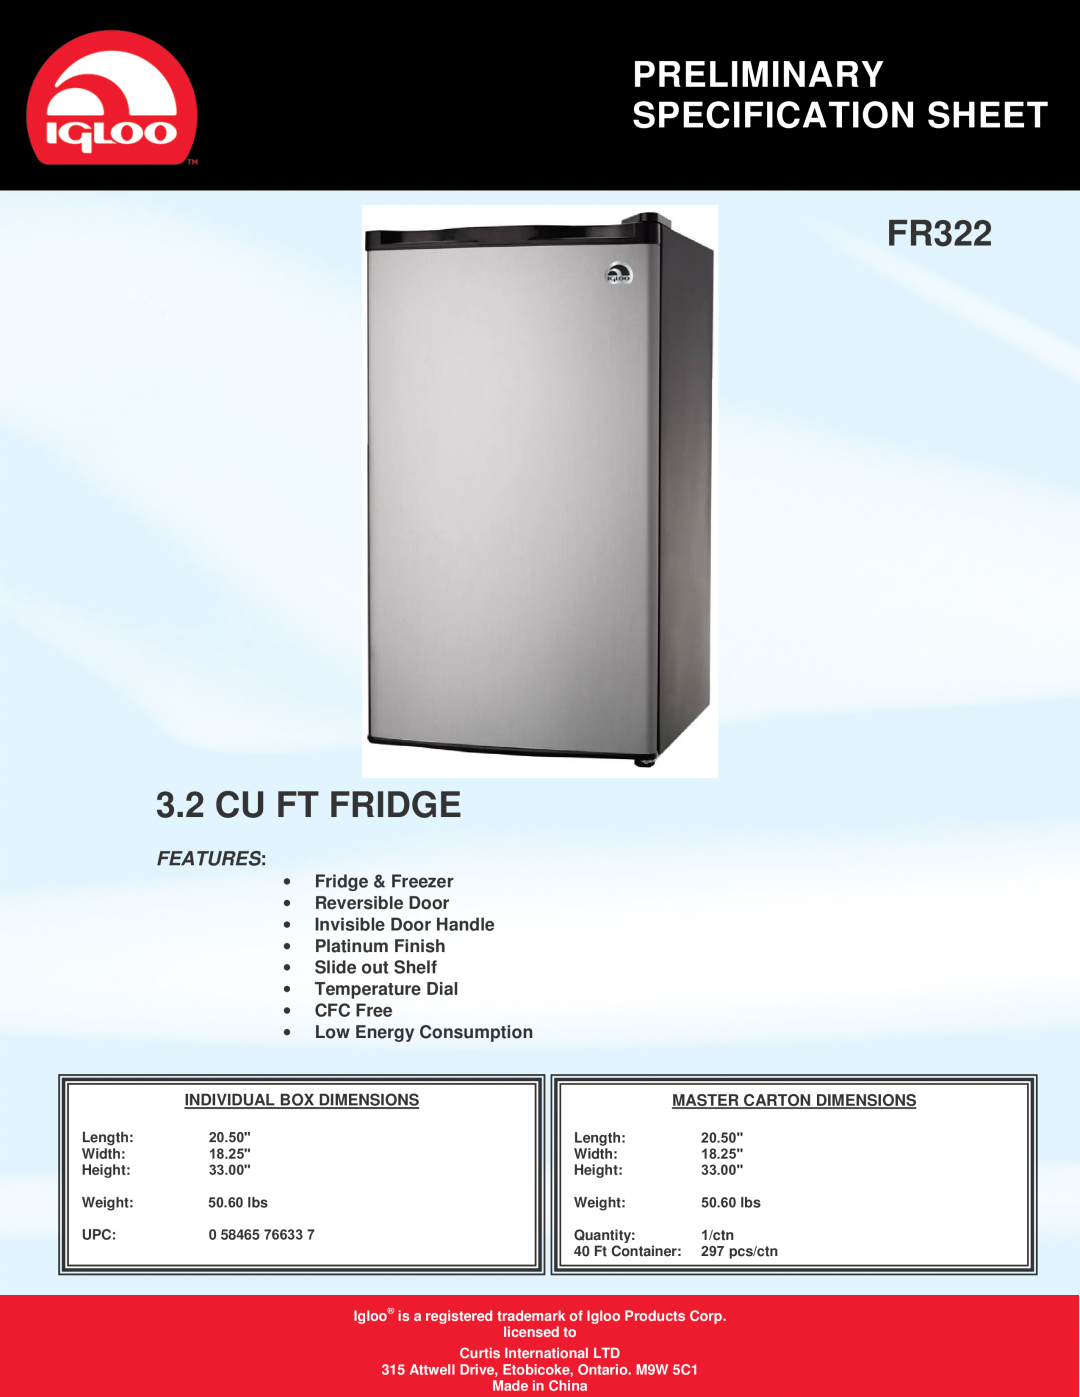 Igloo specifications Preliminary Specification Sheet, FR322 3.2 CU FT FRIDGE, Features, Low Energy Consumption 